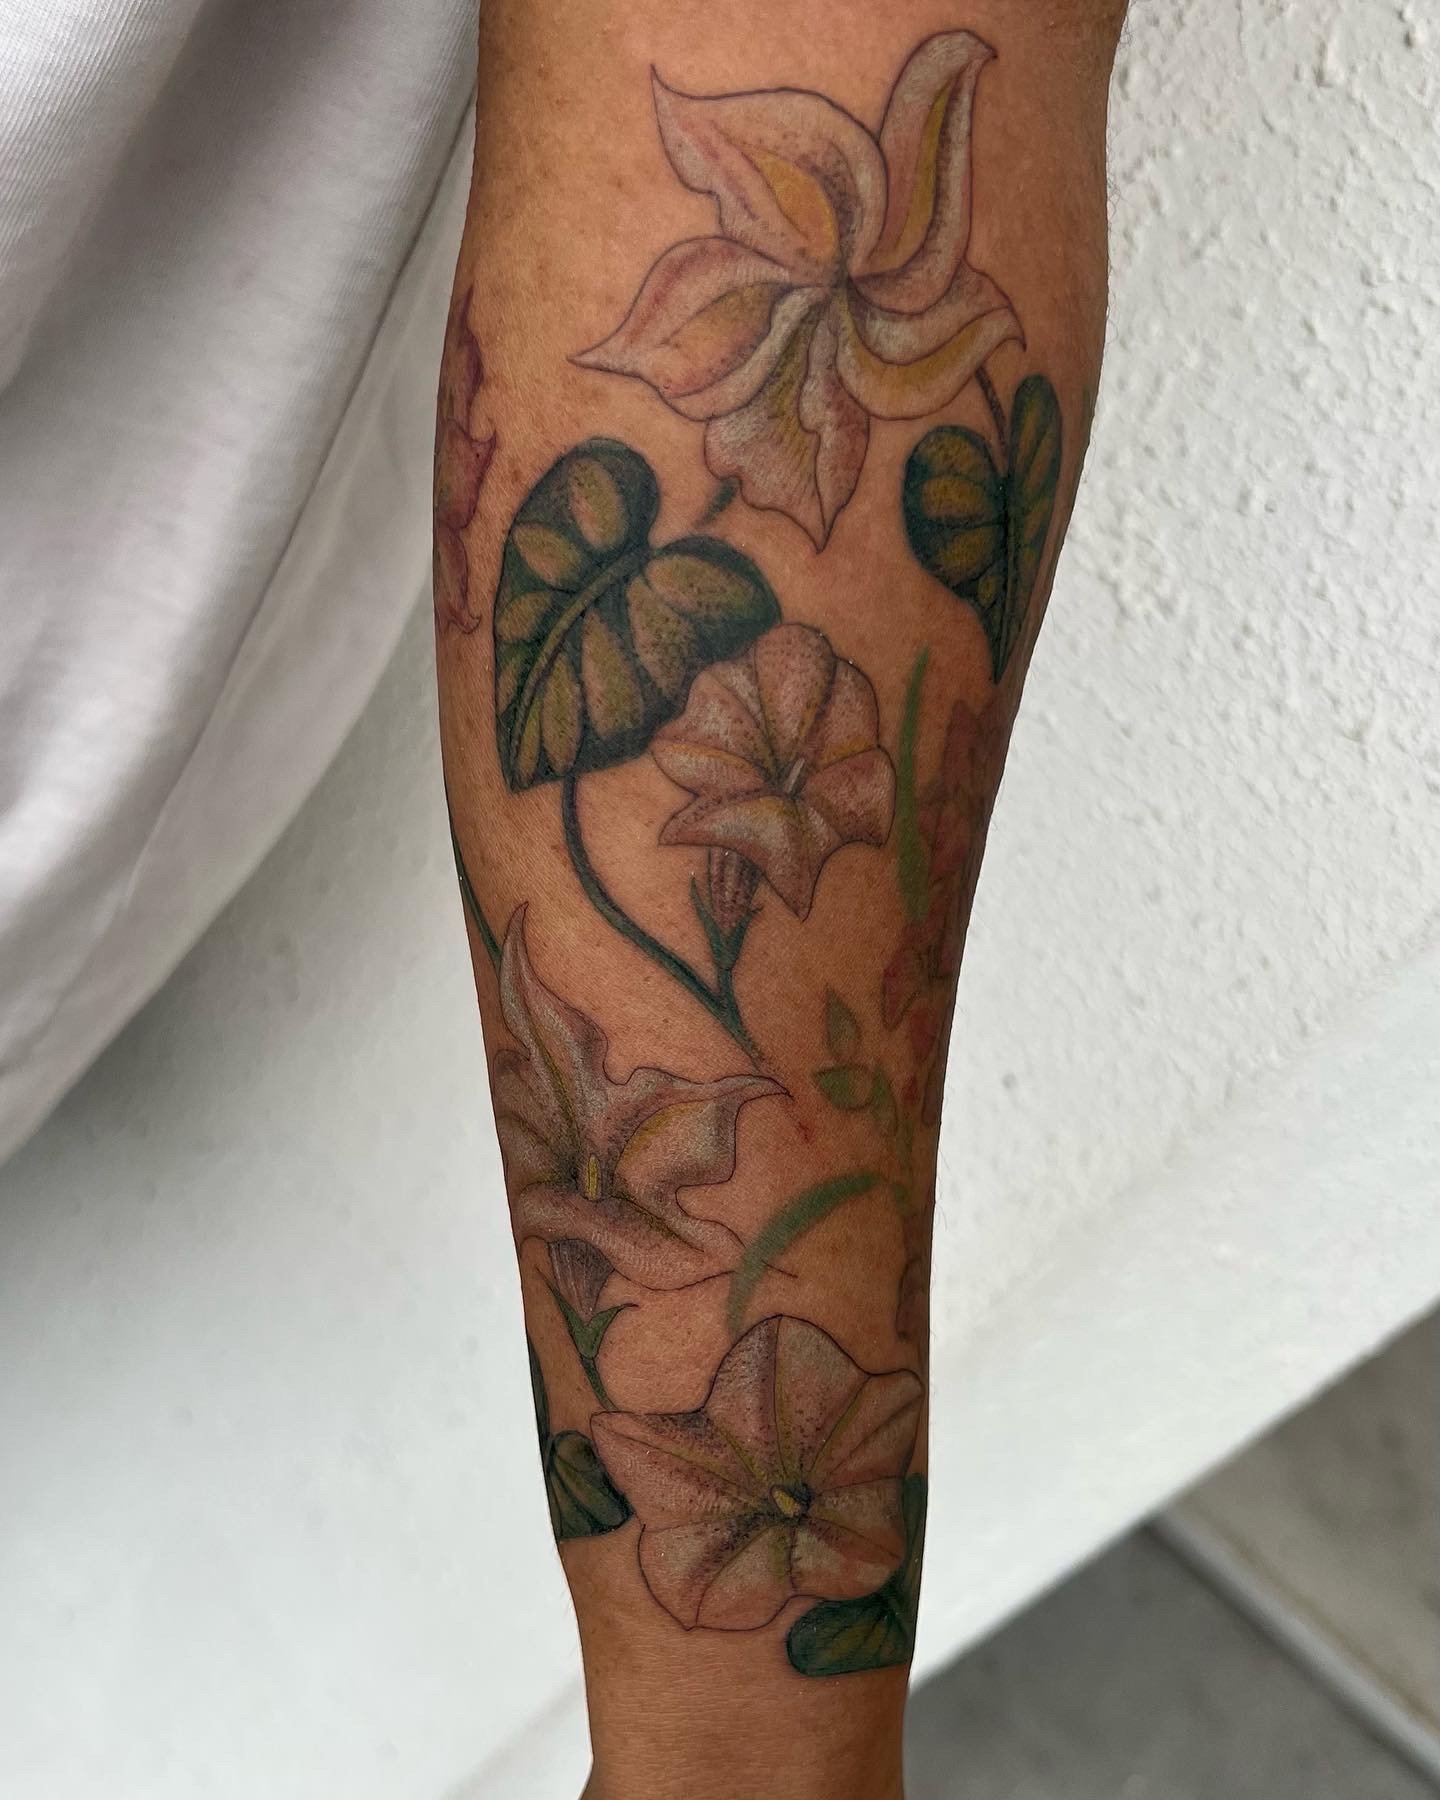  color tattoo of vining flowers on highly melanated skin. The green looks vibrant and beautiful with illustrated flowers on dark skin, forearm of woman. half sleeve  